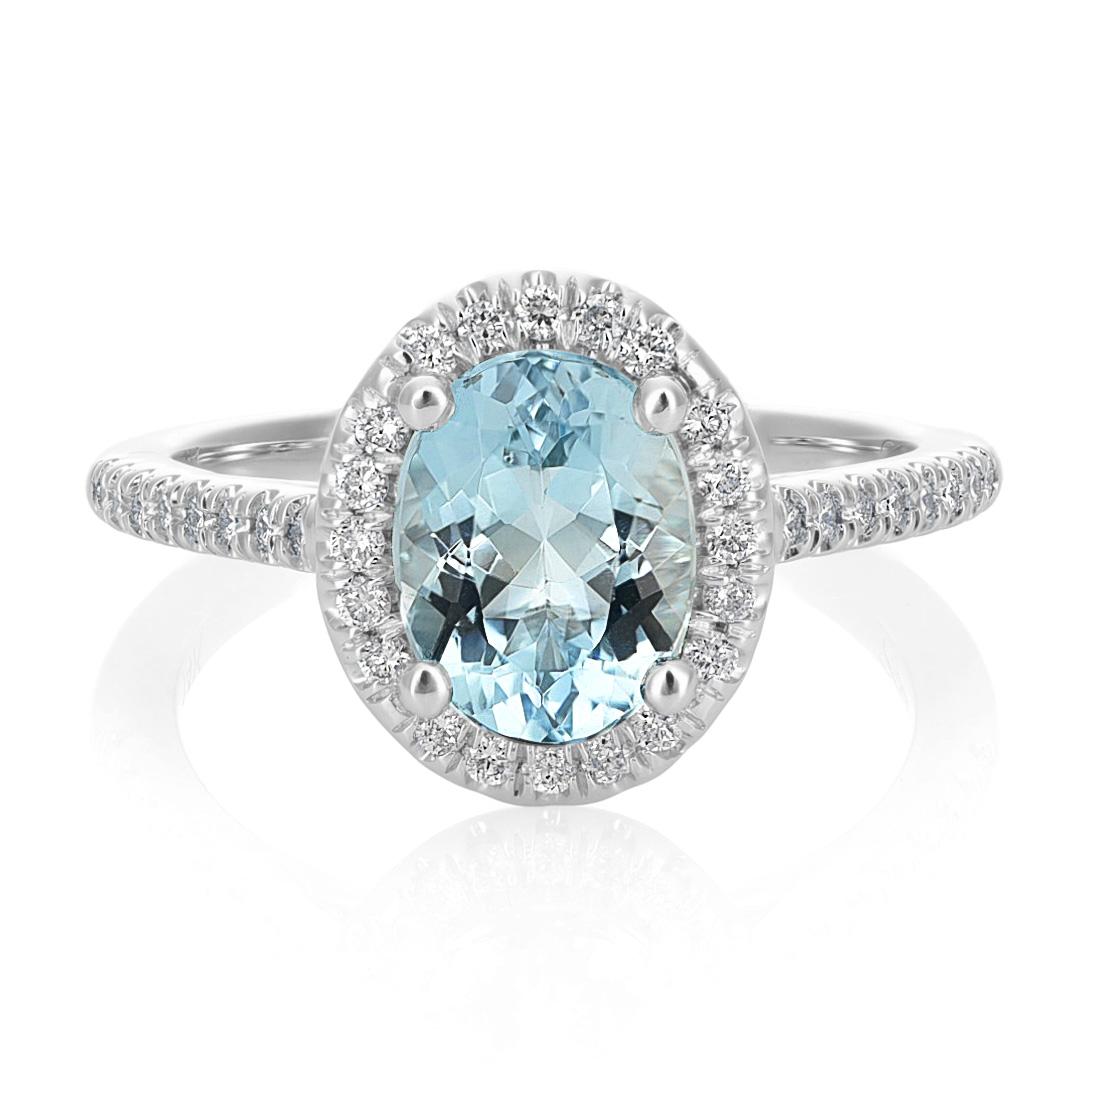 1.01 Carats Natural Aquamarine Diamonds set in 14K White Gold In New Condition For Sale In Los Angeles, CA